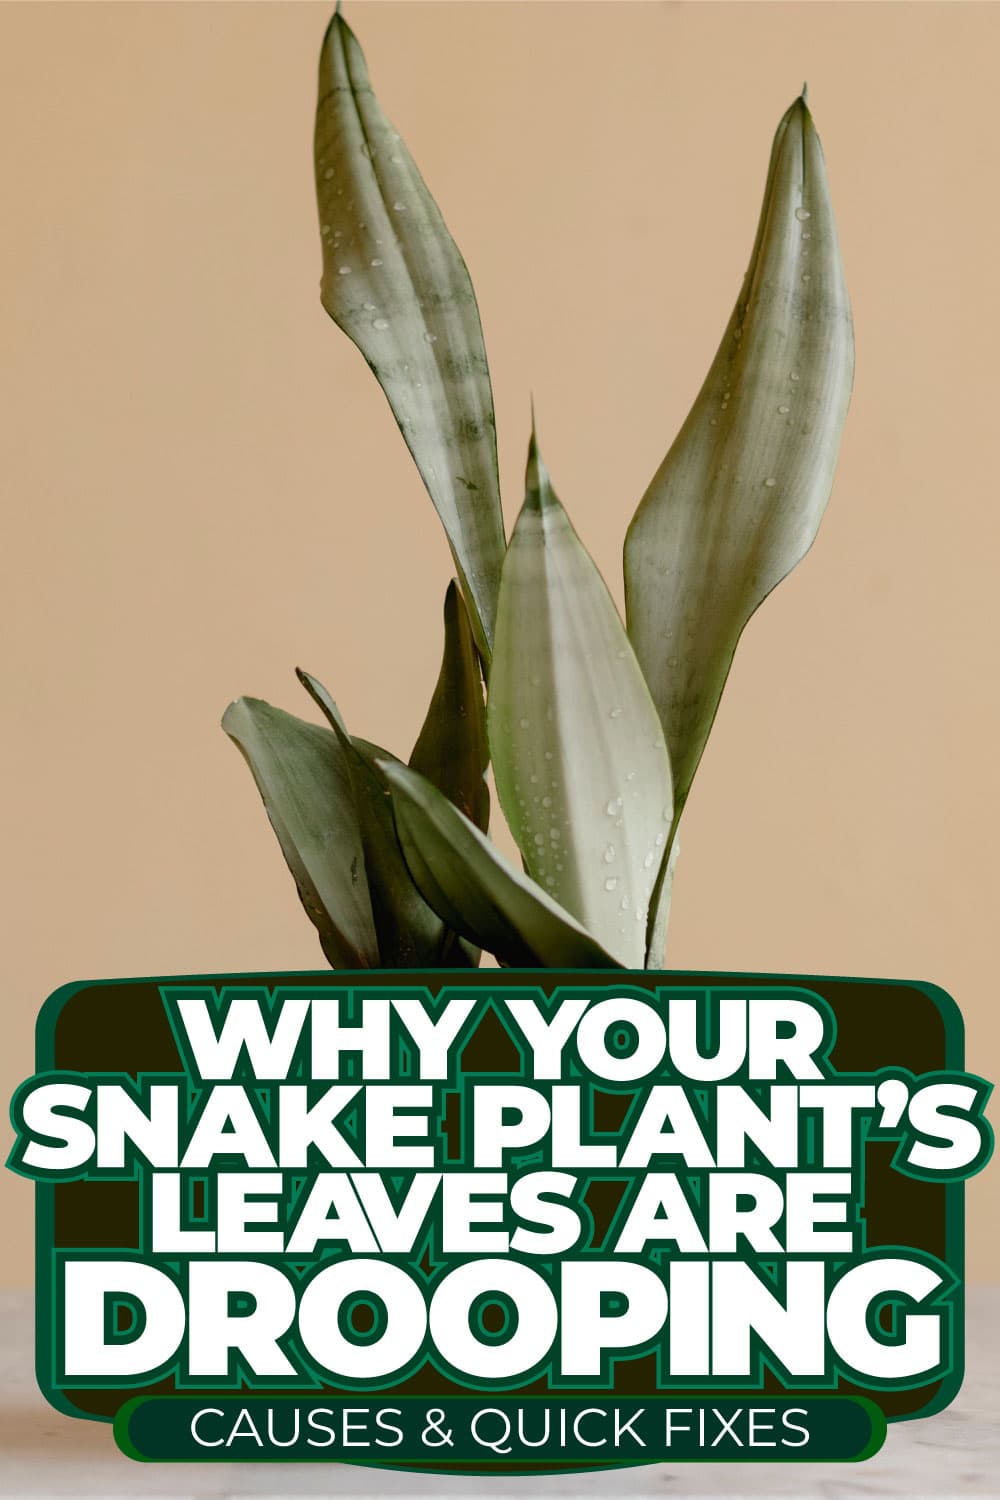 Why Your Snake Plant's Leaves Are Drooping Causes & Quick Fixes